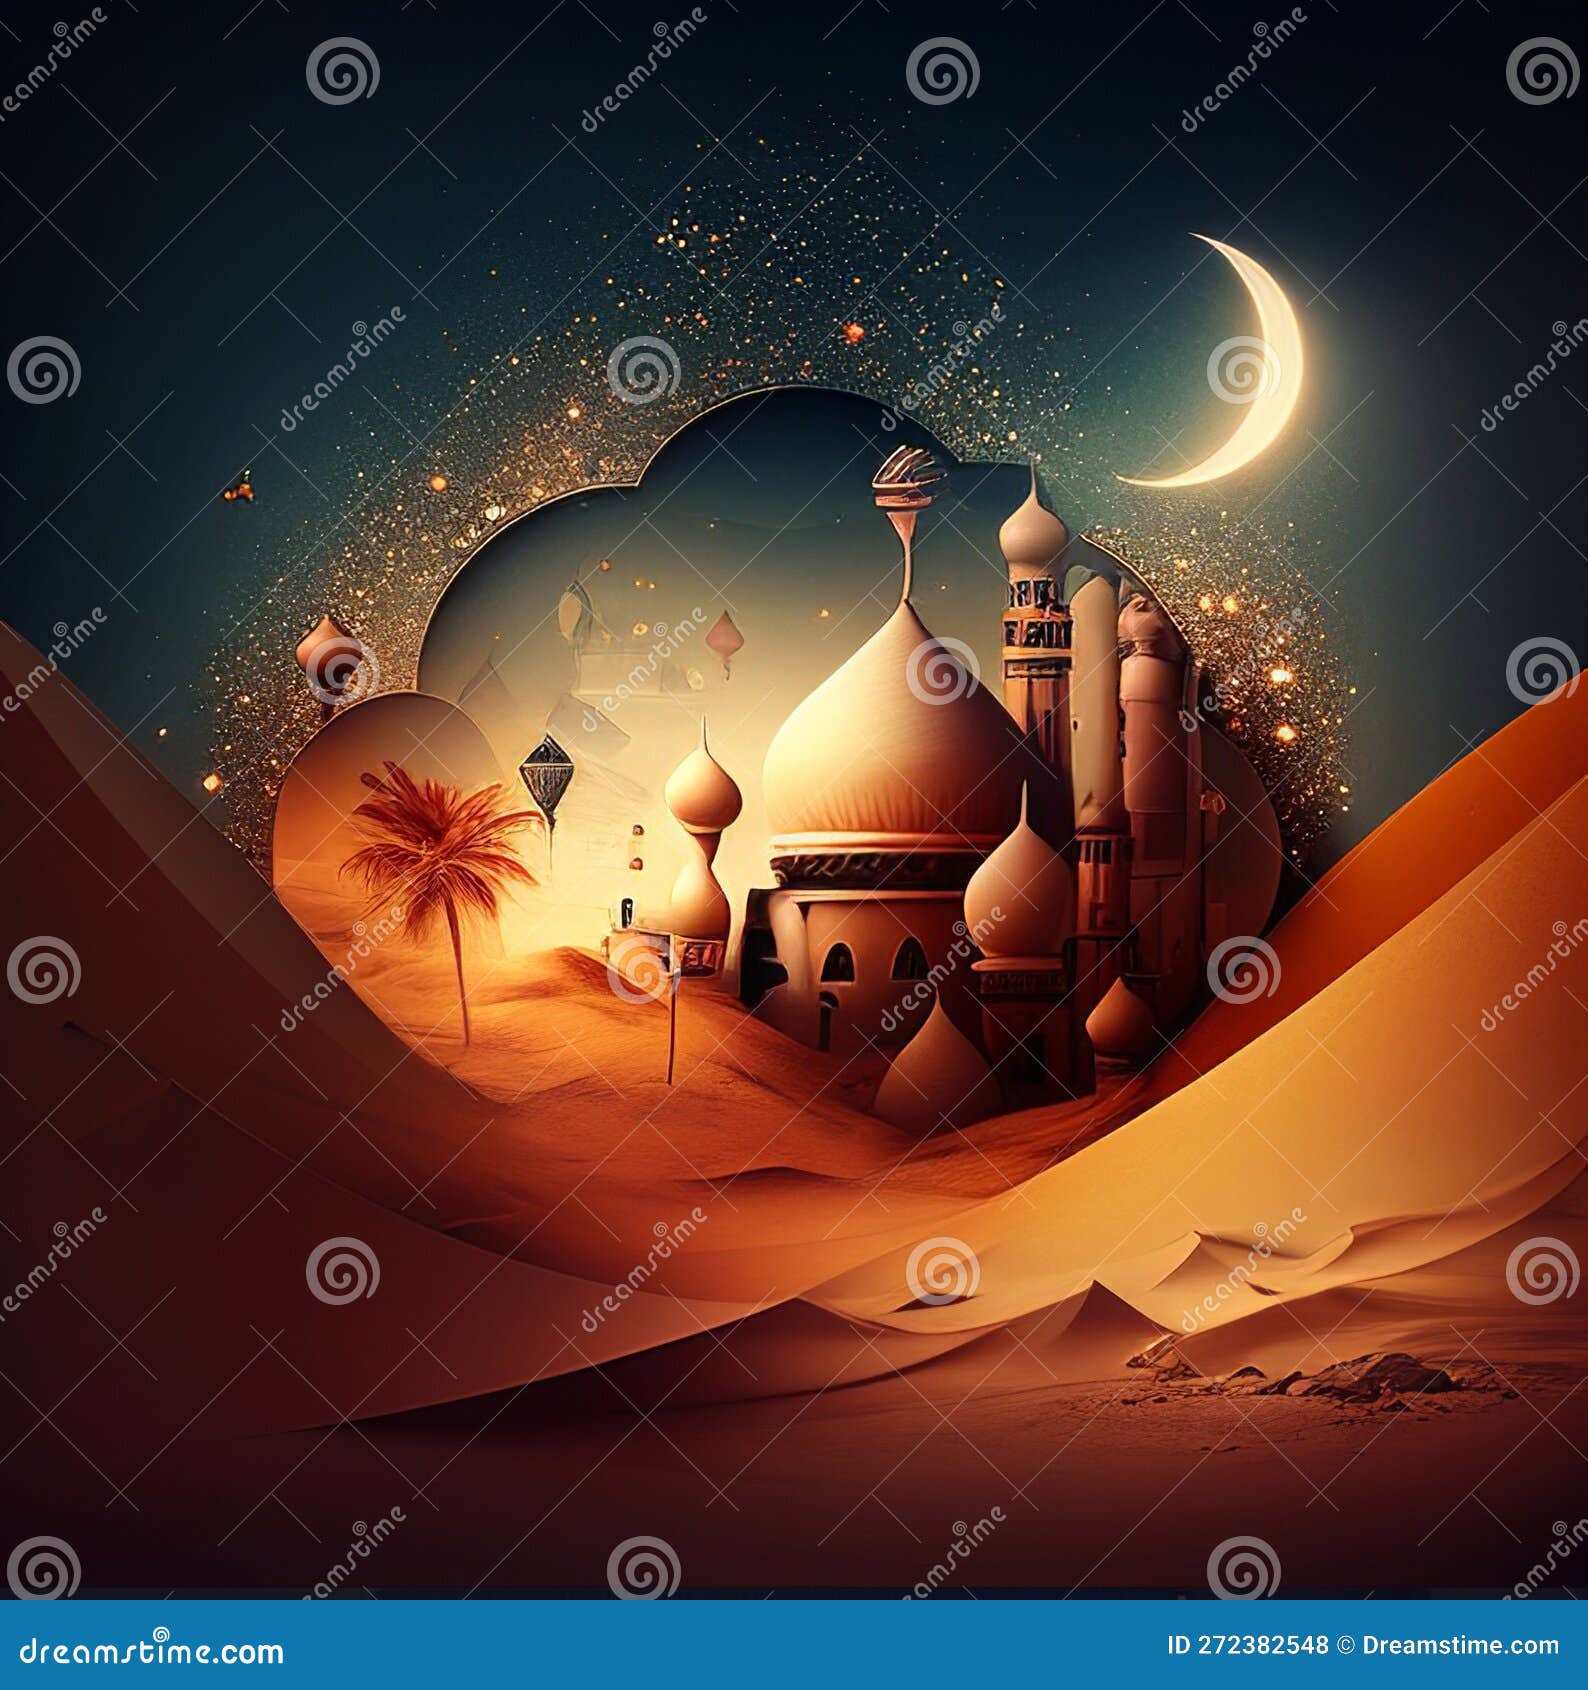 mosque with the theme of ramadan and islamic holidays